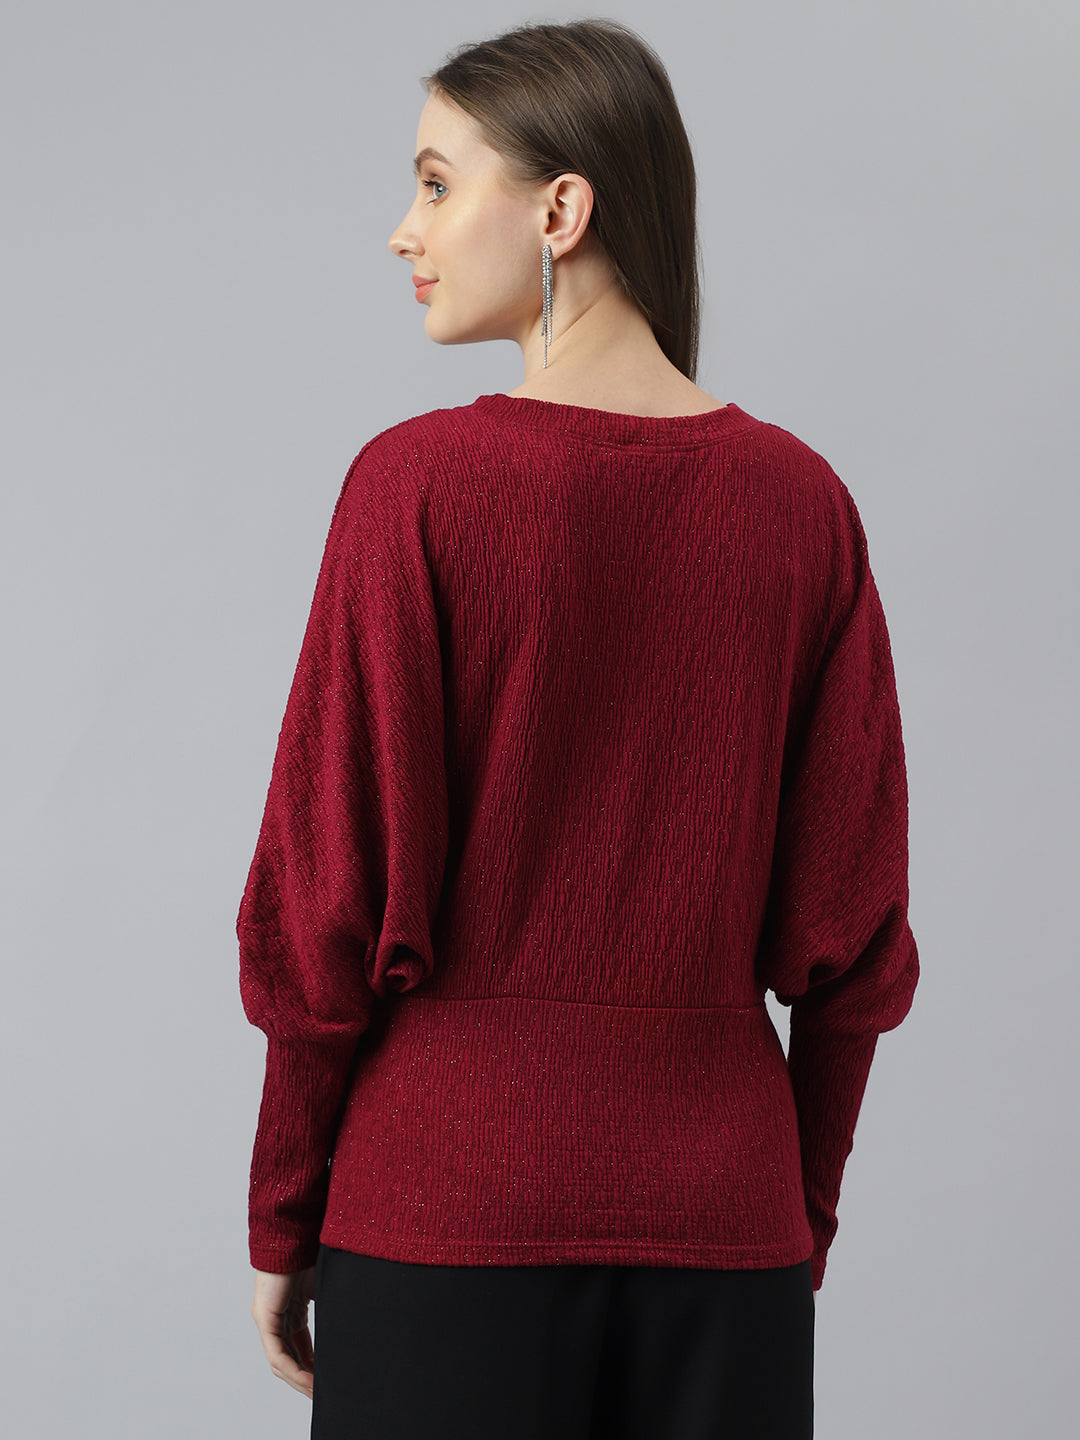 Maroon Full Sleeve Round Neck Women Knit Top for Casual